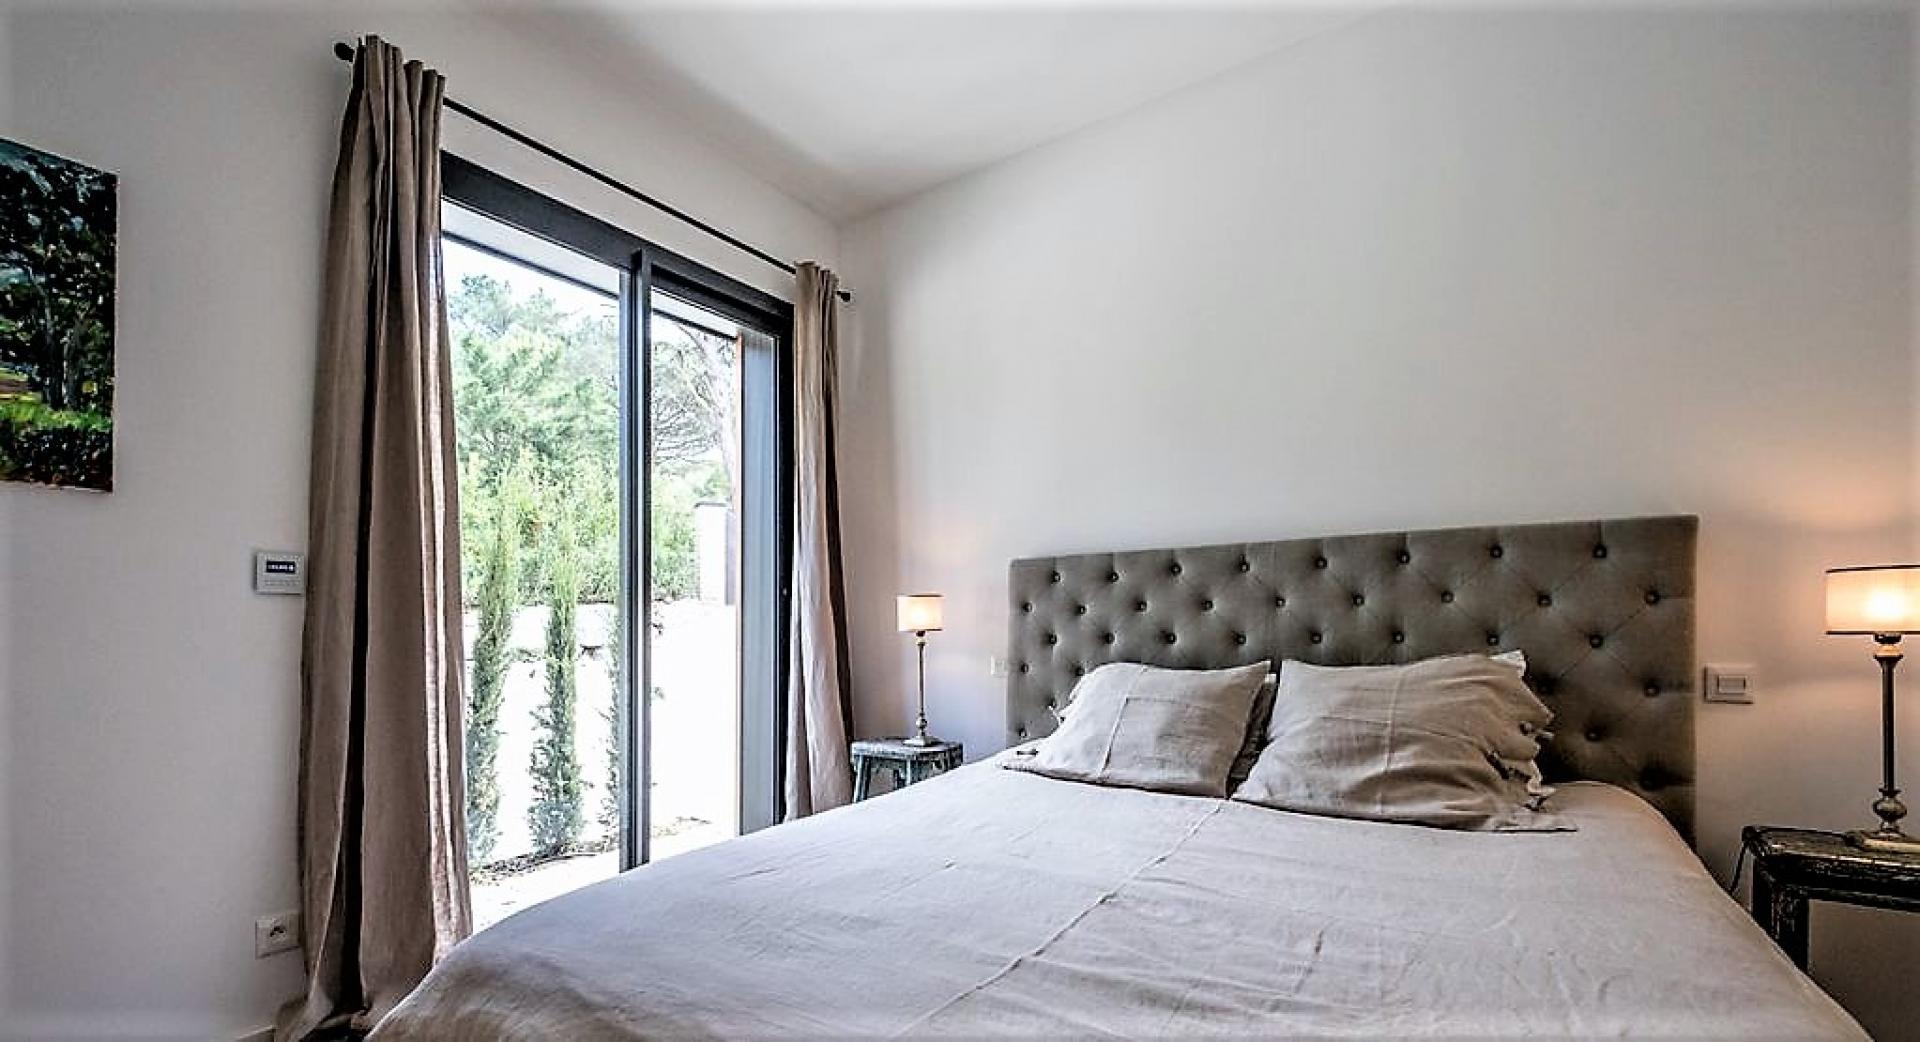 VILLA DE LA PINEDE HOLIDAY RENTAL ST TROPEZ SOUTH OF FRANCE AND ONE OF ITS MASTER BEDROOM